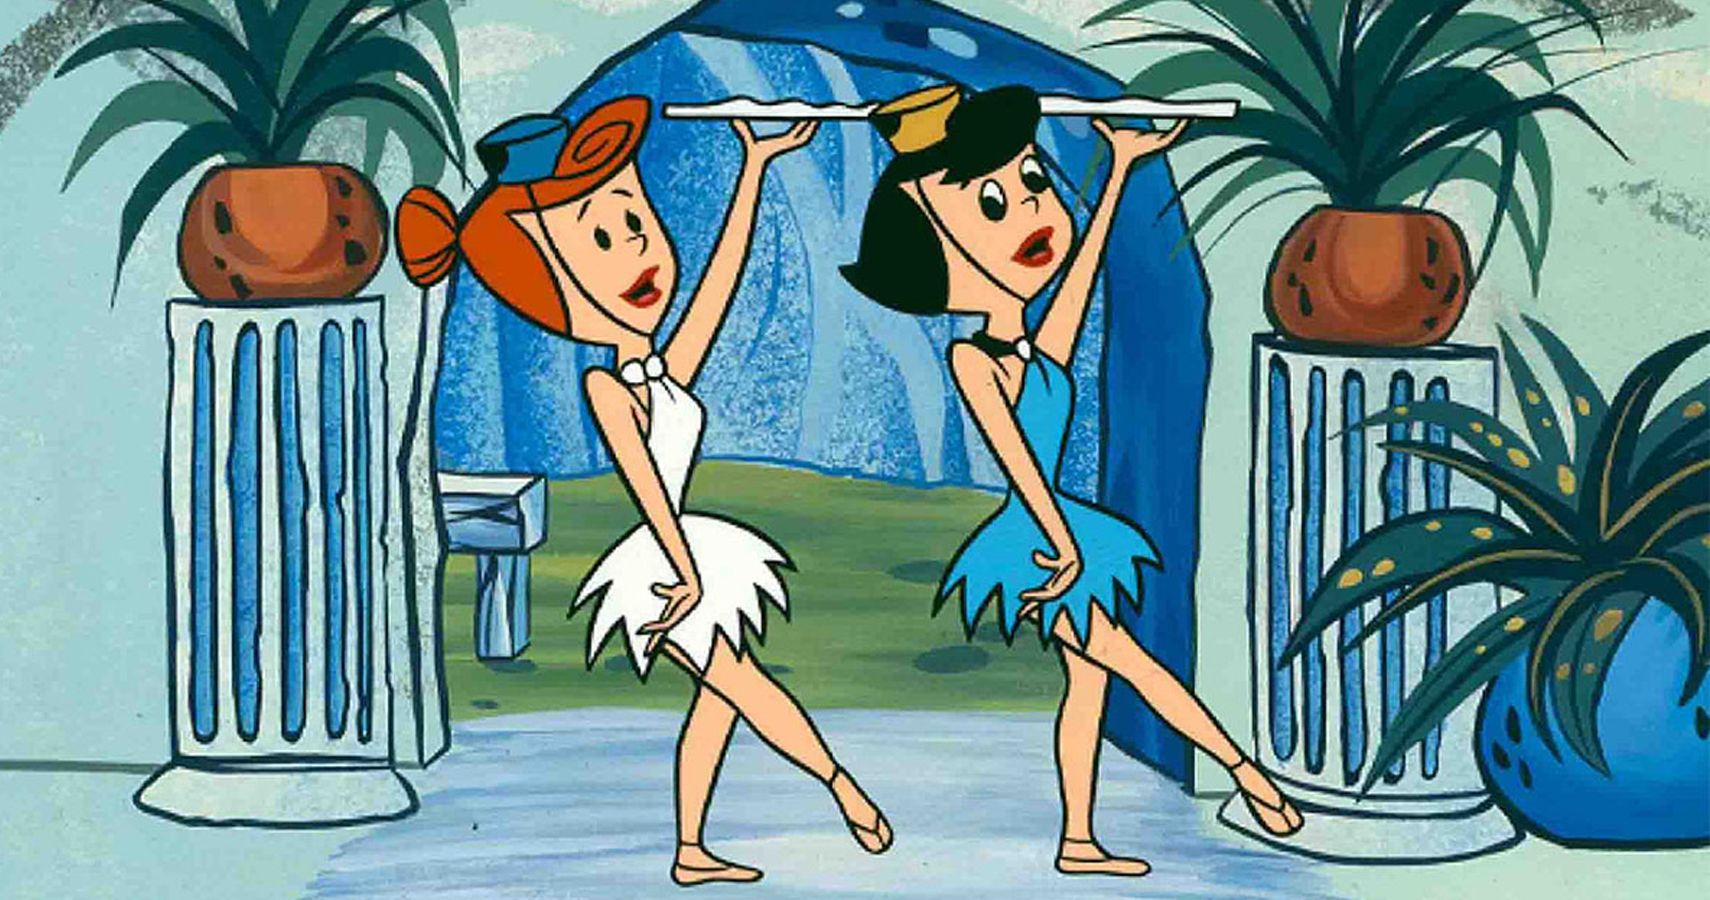 when did the flintstones first air